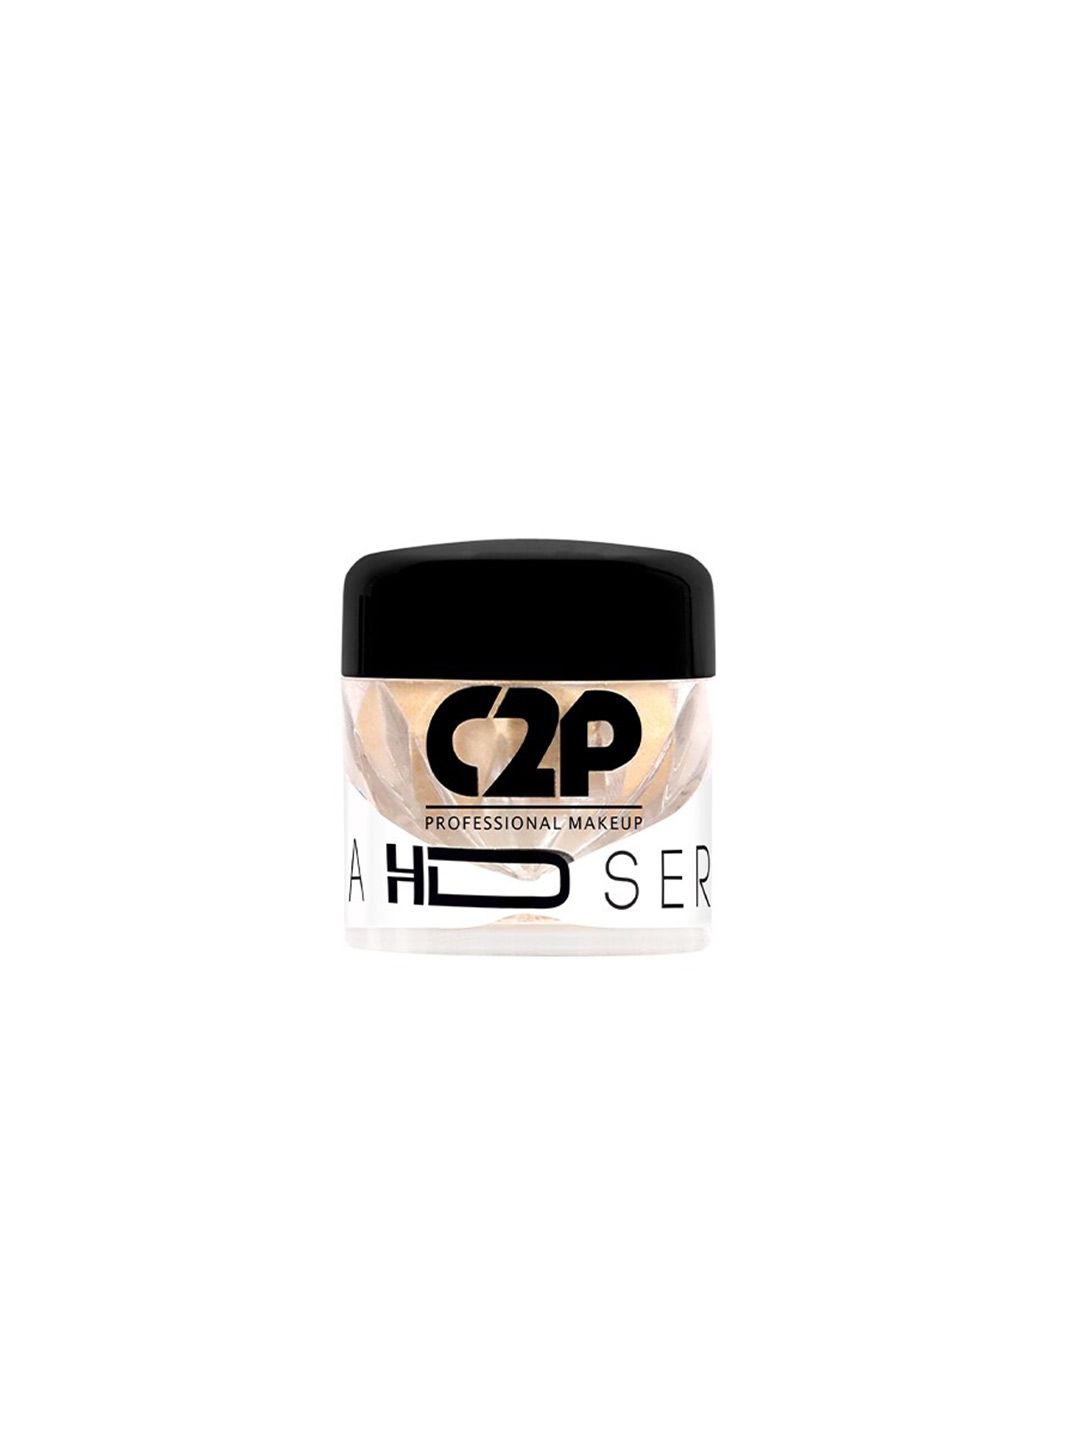 C2P PROFESSIONAL MAKEUP HD Loose Precious Pigments Eyeshadow - Mid Night 10 Price in India